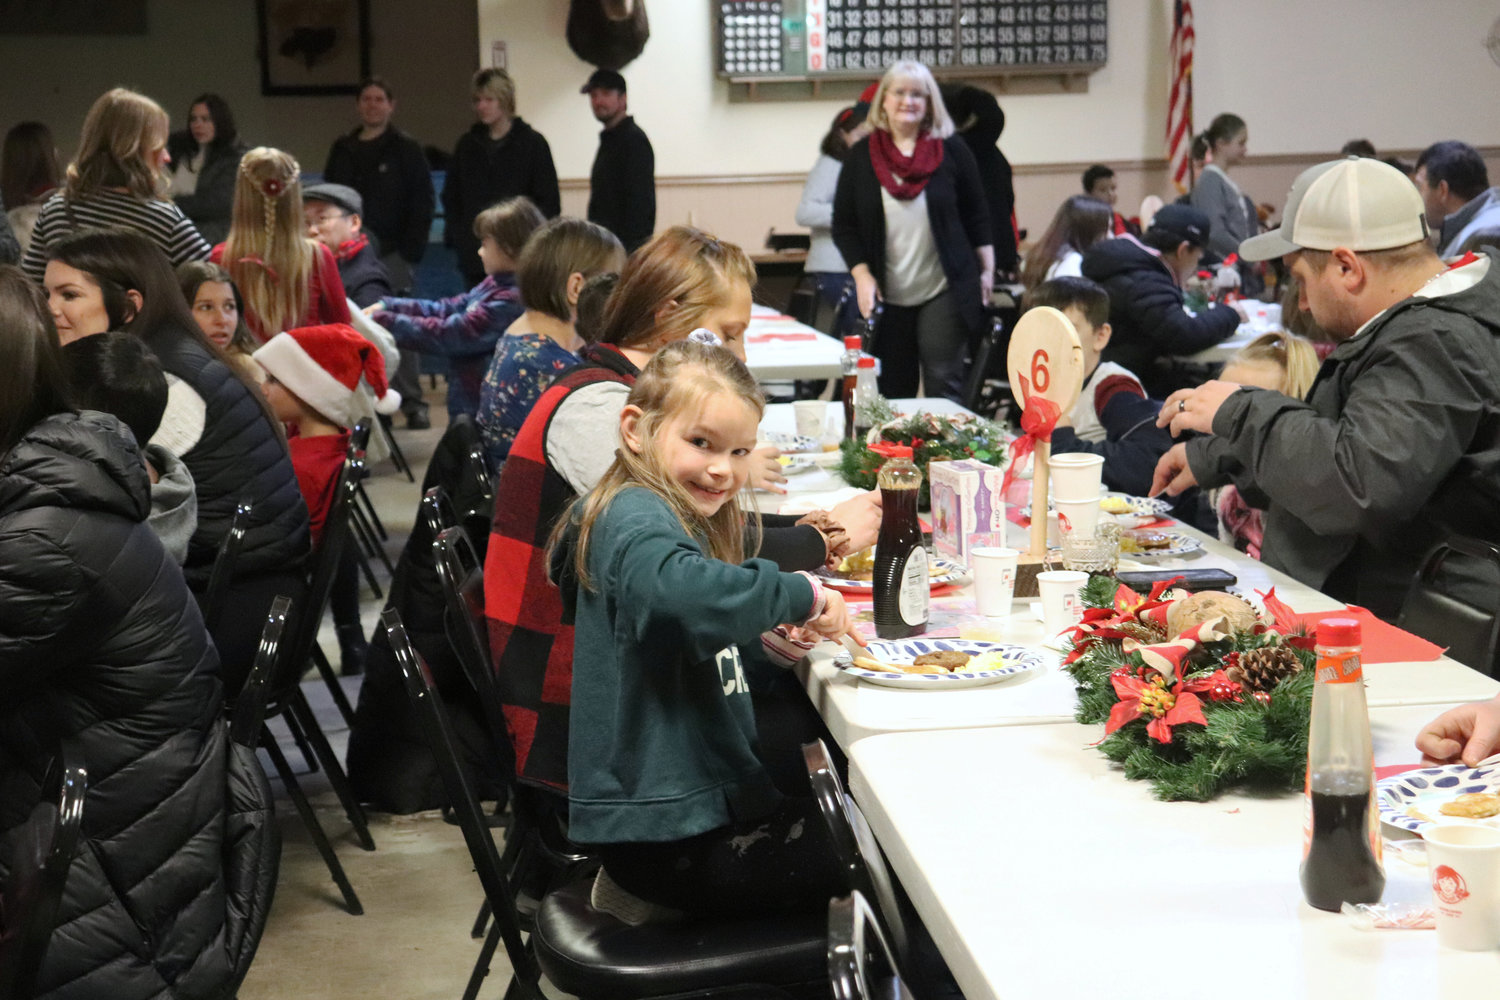 Families enjoy breakfast during a Breakfast with Santa event at the Moose Family Center in Centralia on Saturday. The event was a fundraiser for Mary Bridge Children’s Hospital.